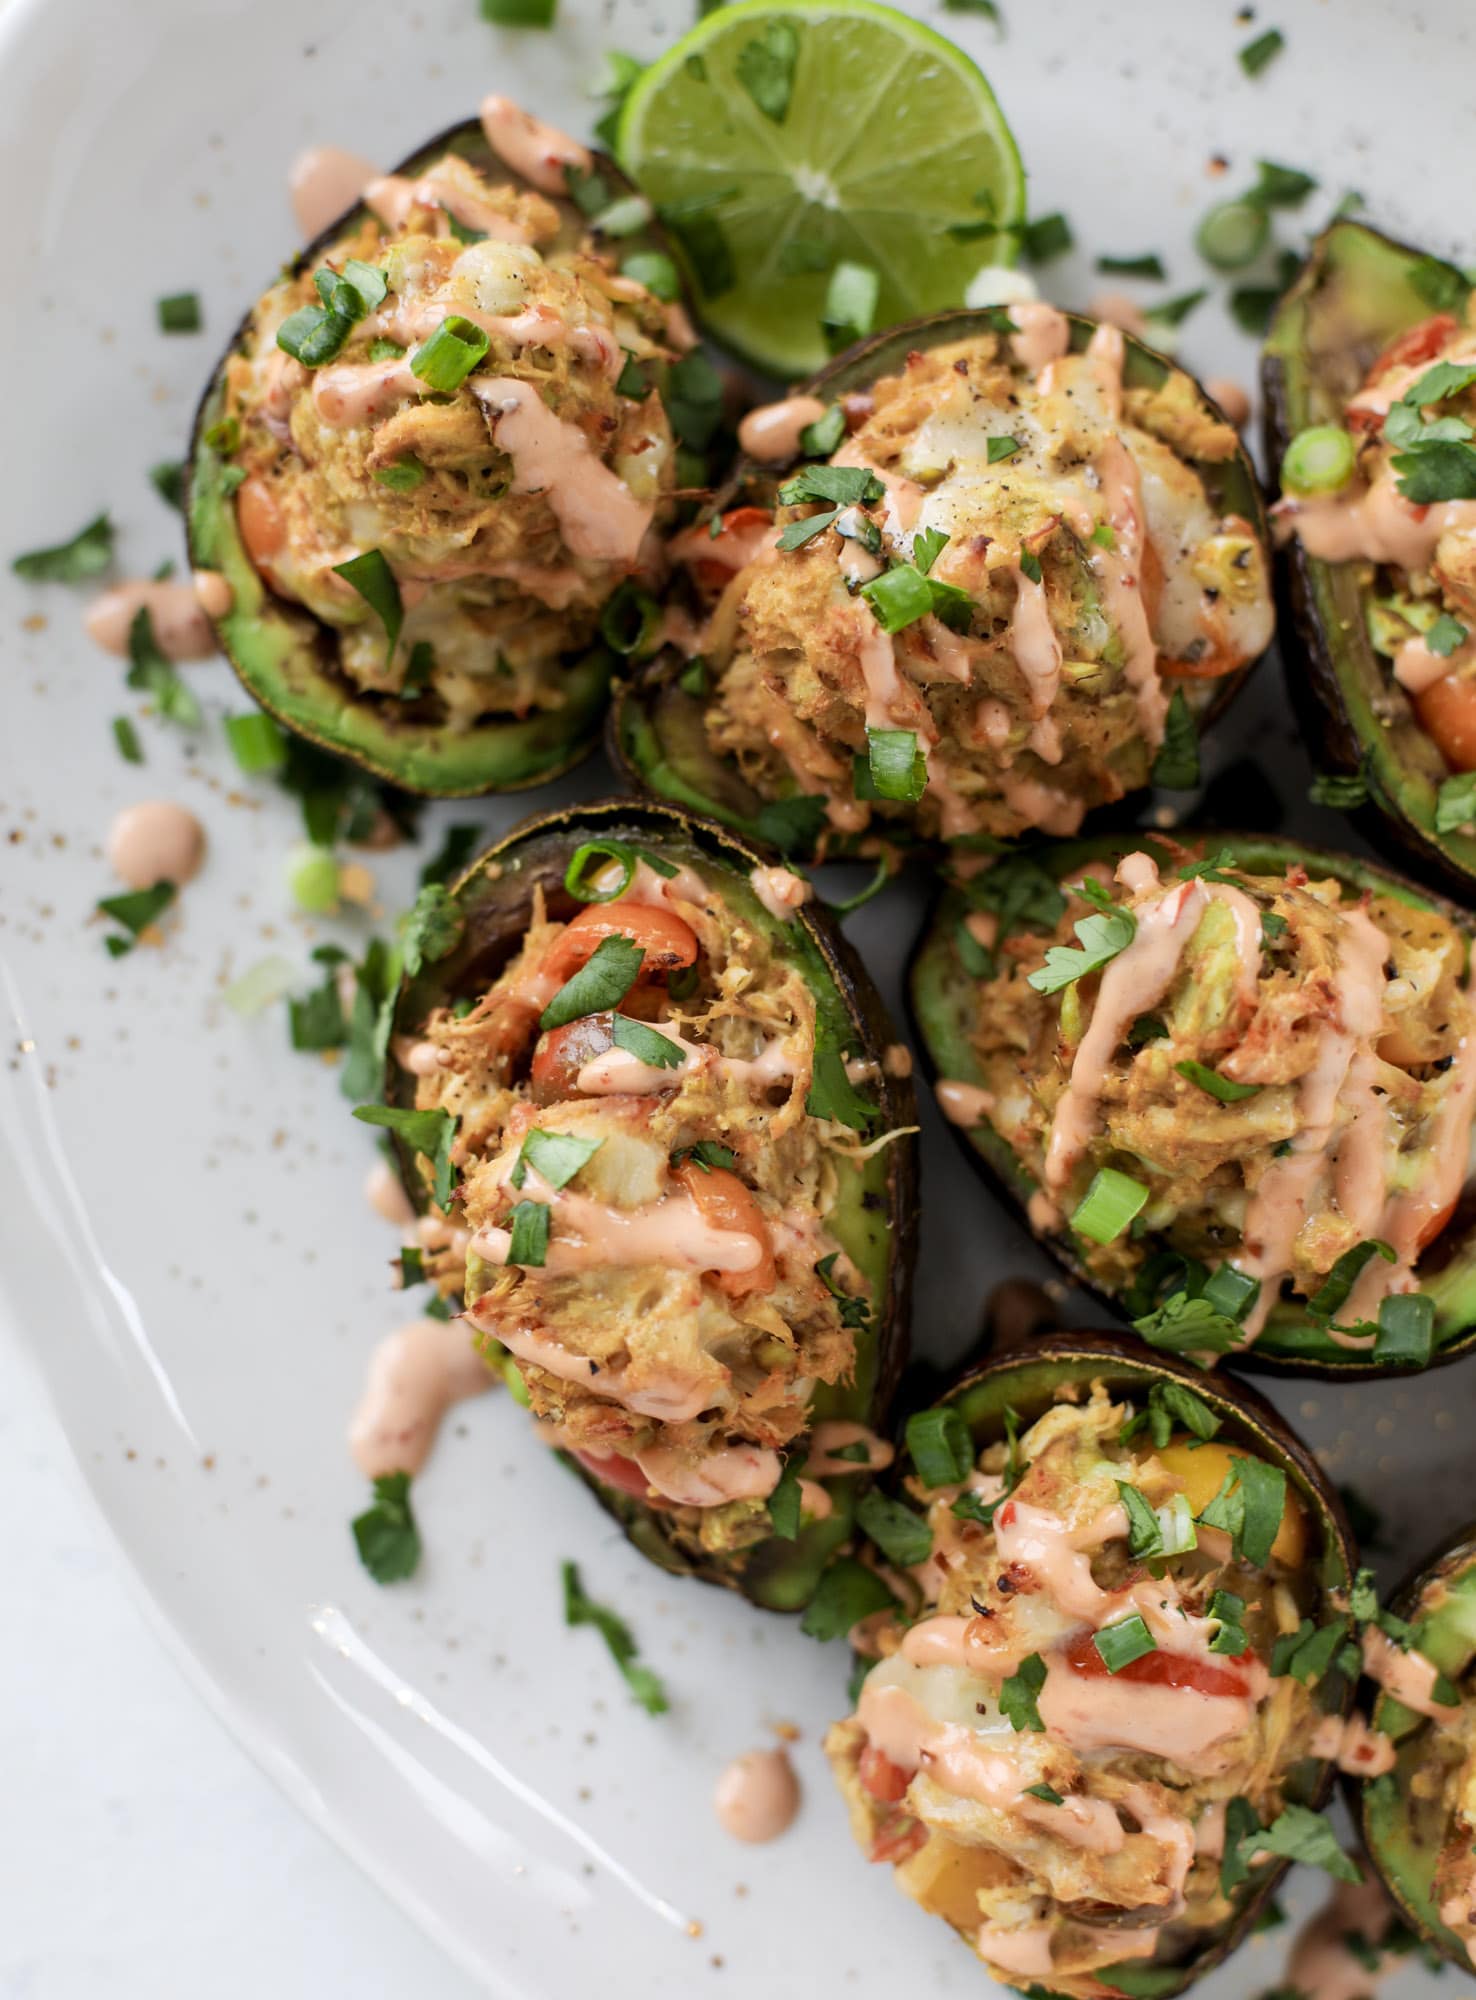 These baked avocados are stuffed with a cheesy chicken mixture and drizzled with sriracha yogurt sauce! Super delicious and an easy weeknight meal. I howsweeteats.com #baked #avocados